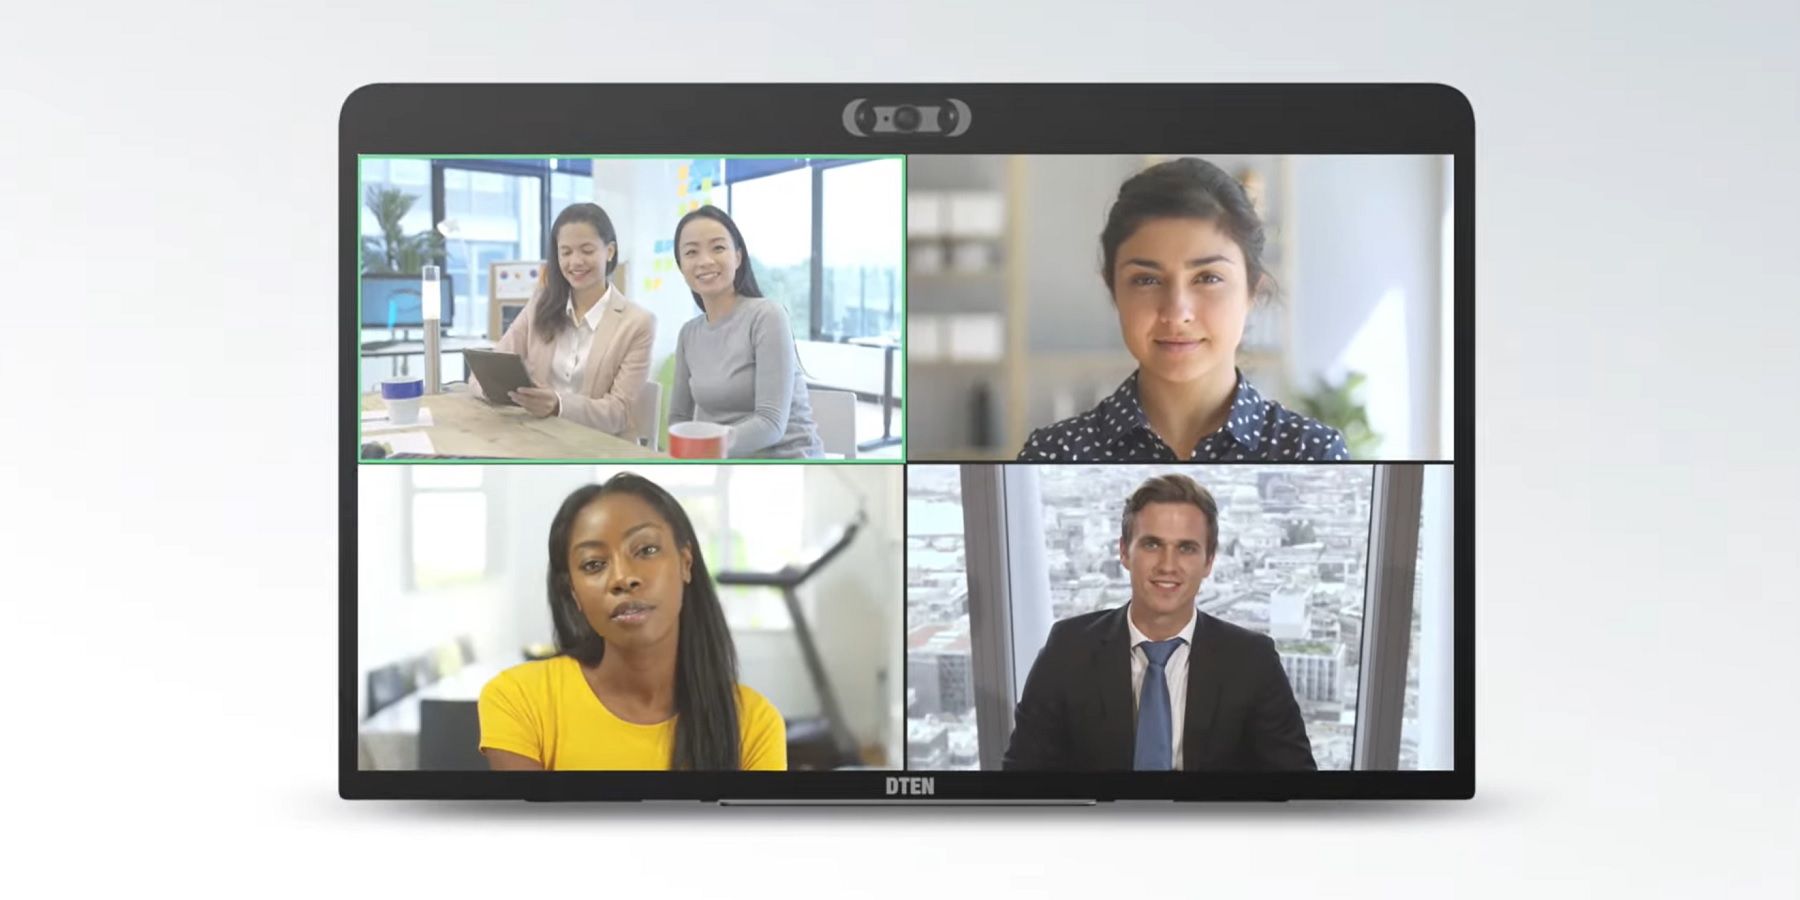 Zoom Is Selling A Device So You Can Stop Using Macs & PCs For Video Calls